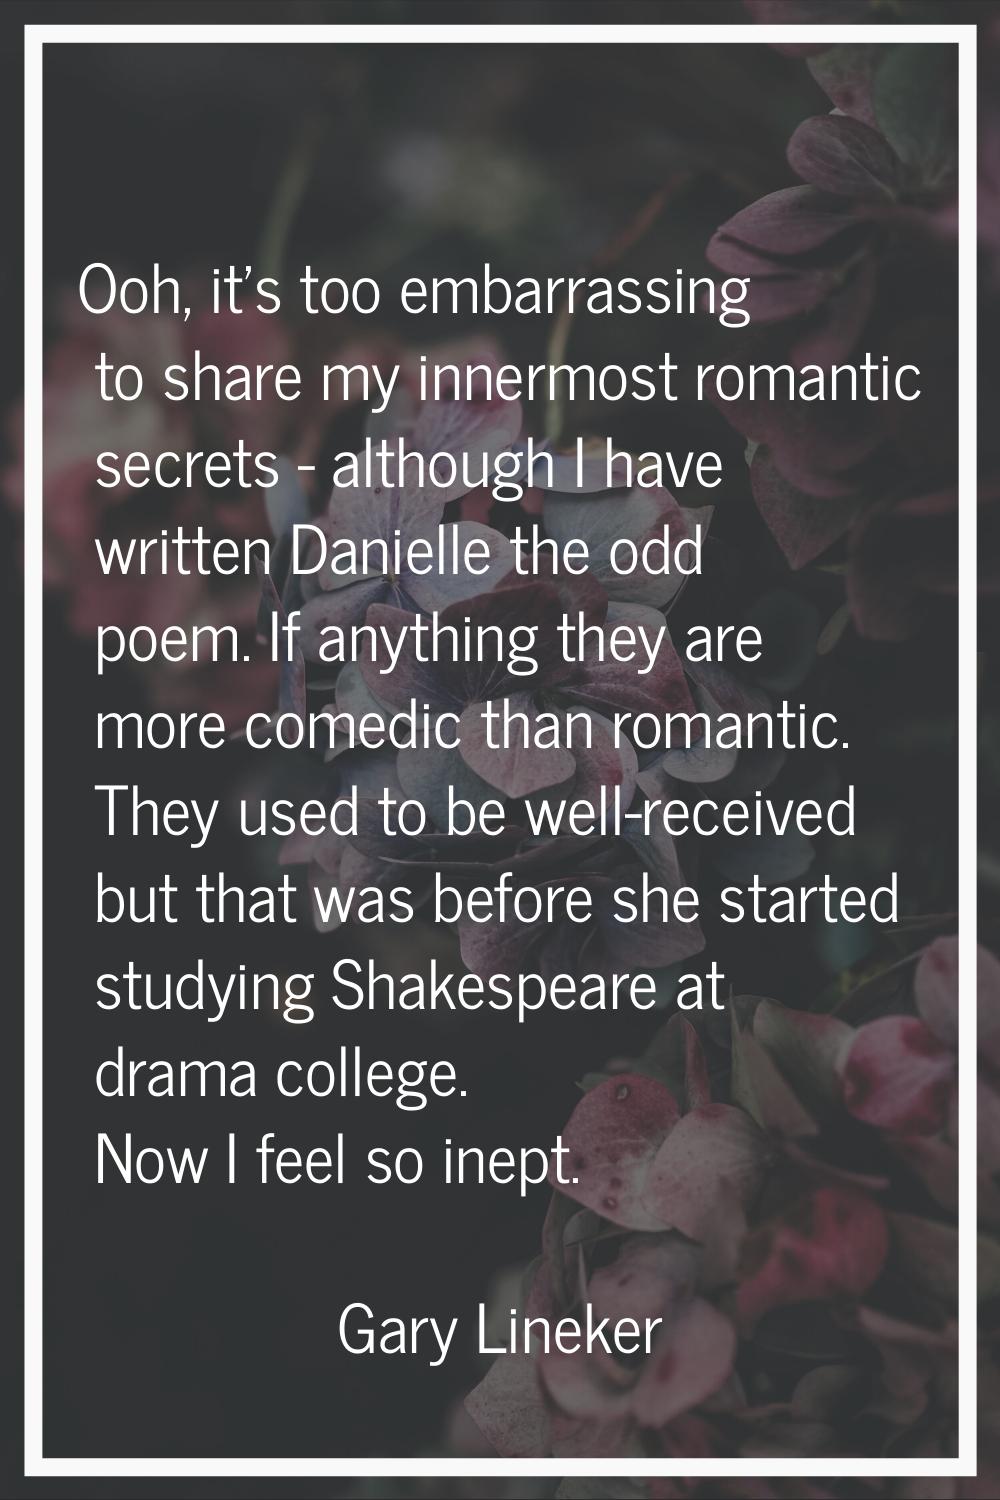 Ooh, it's too embarrassing to share my innermost romantic secrets - although I have written Daniell